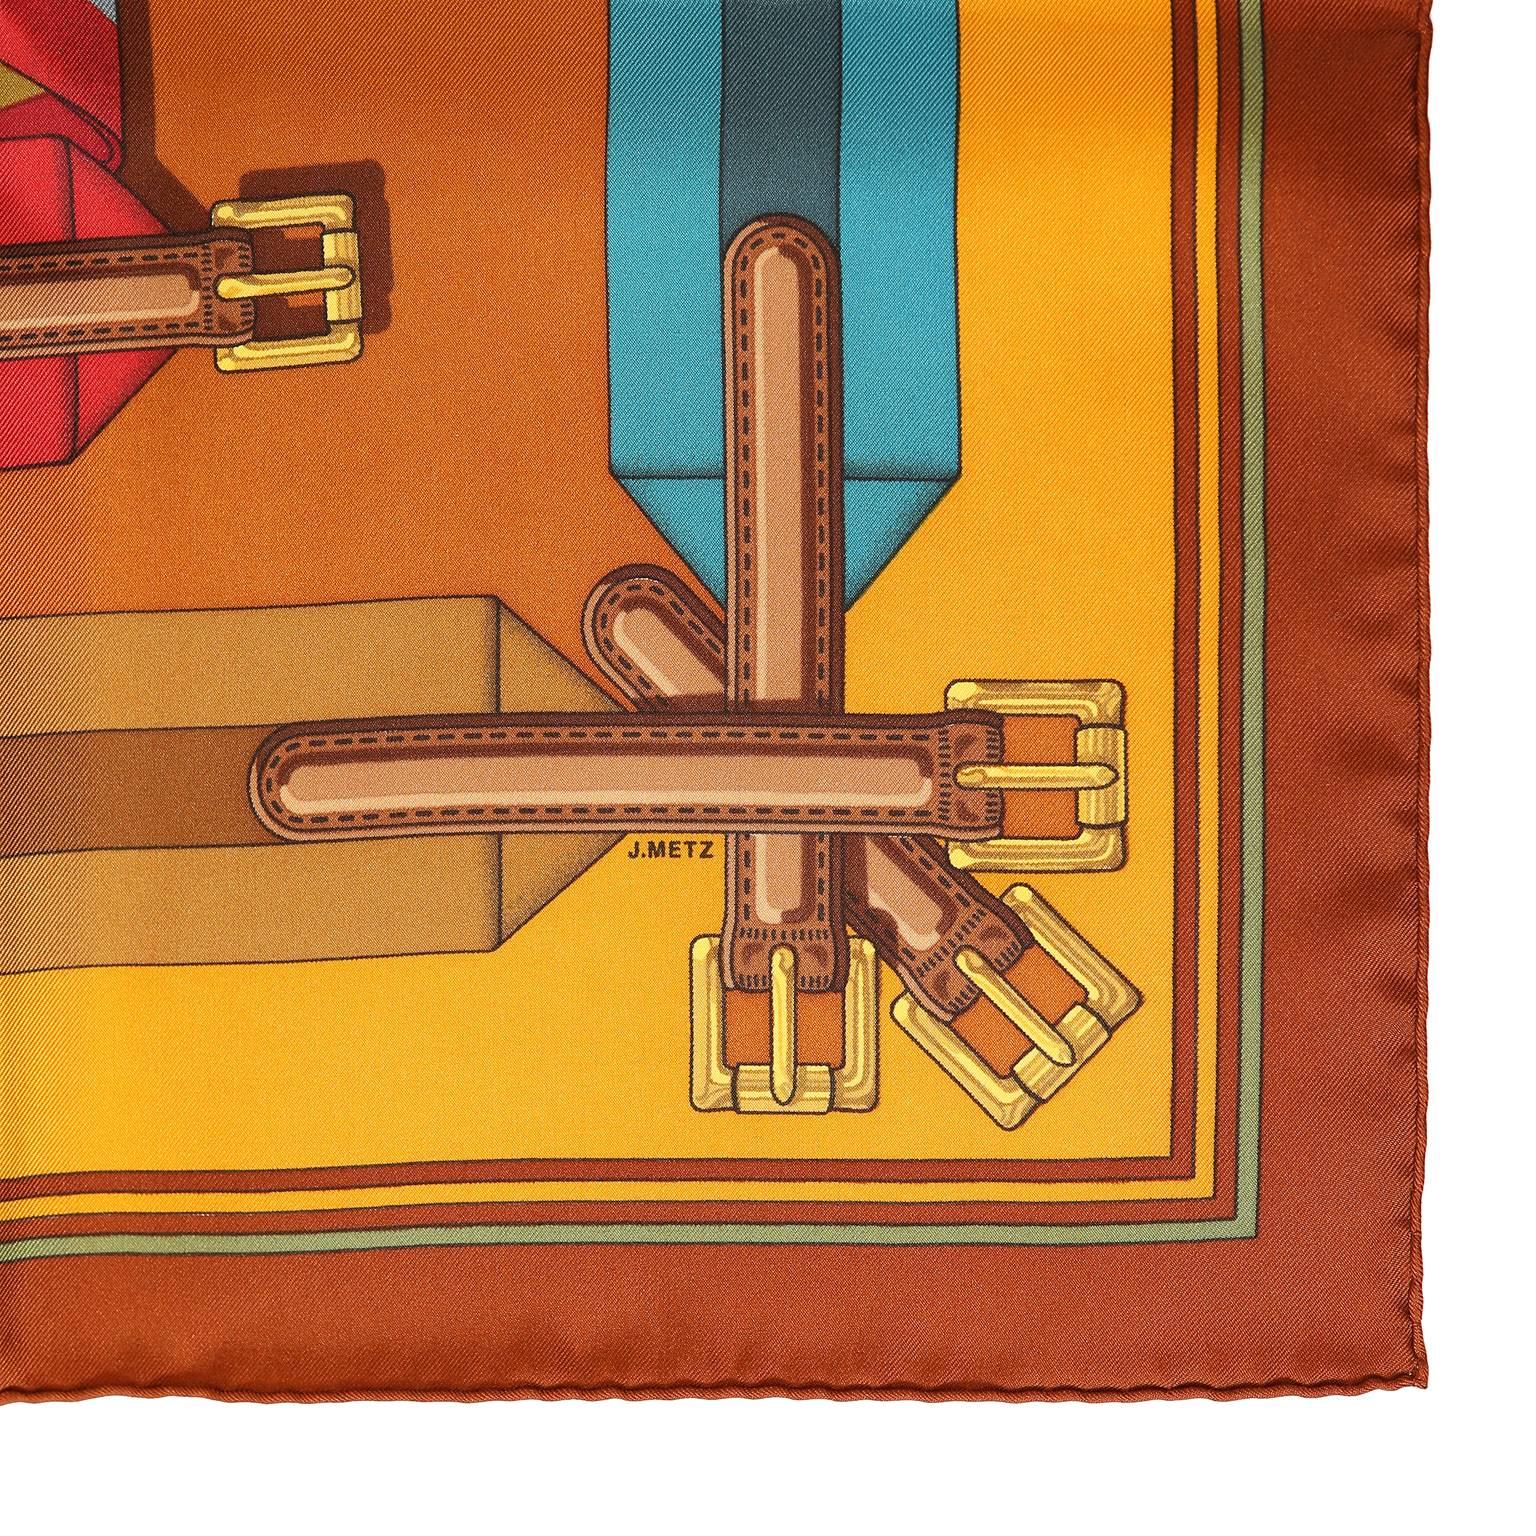 Hermès Belt Print 90 cm Silk Scarf - Pristine Condition 
 The vintage design was originated by J. Metz.  Orange background with three rows of brightly striped ribbon belts hanging decoratively from the bars.   100% silk. Made in France.
A364